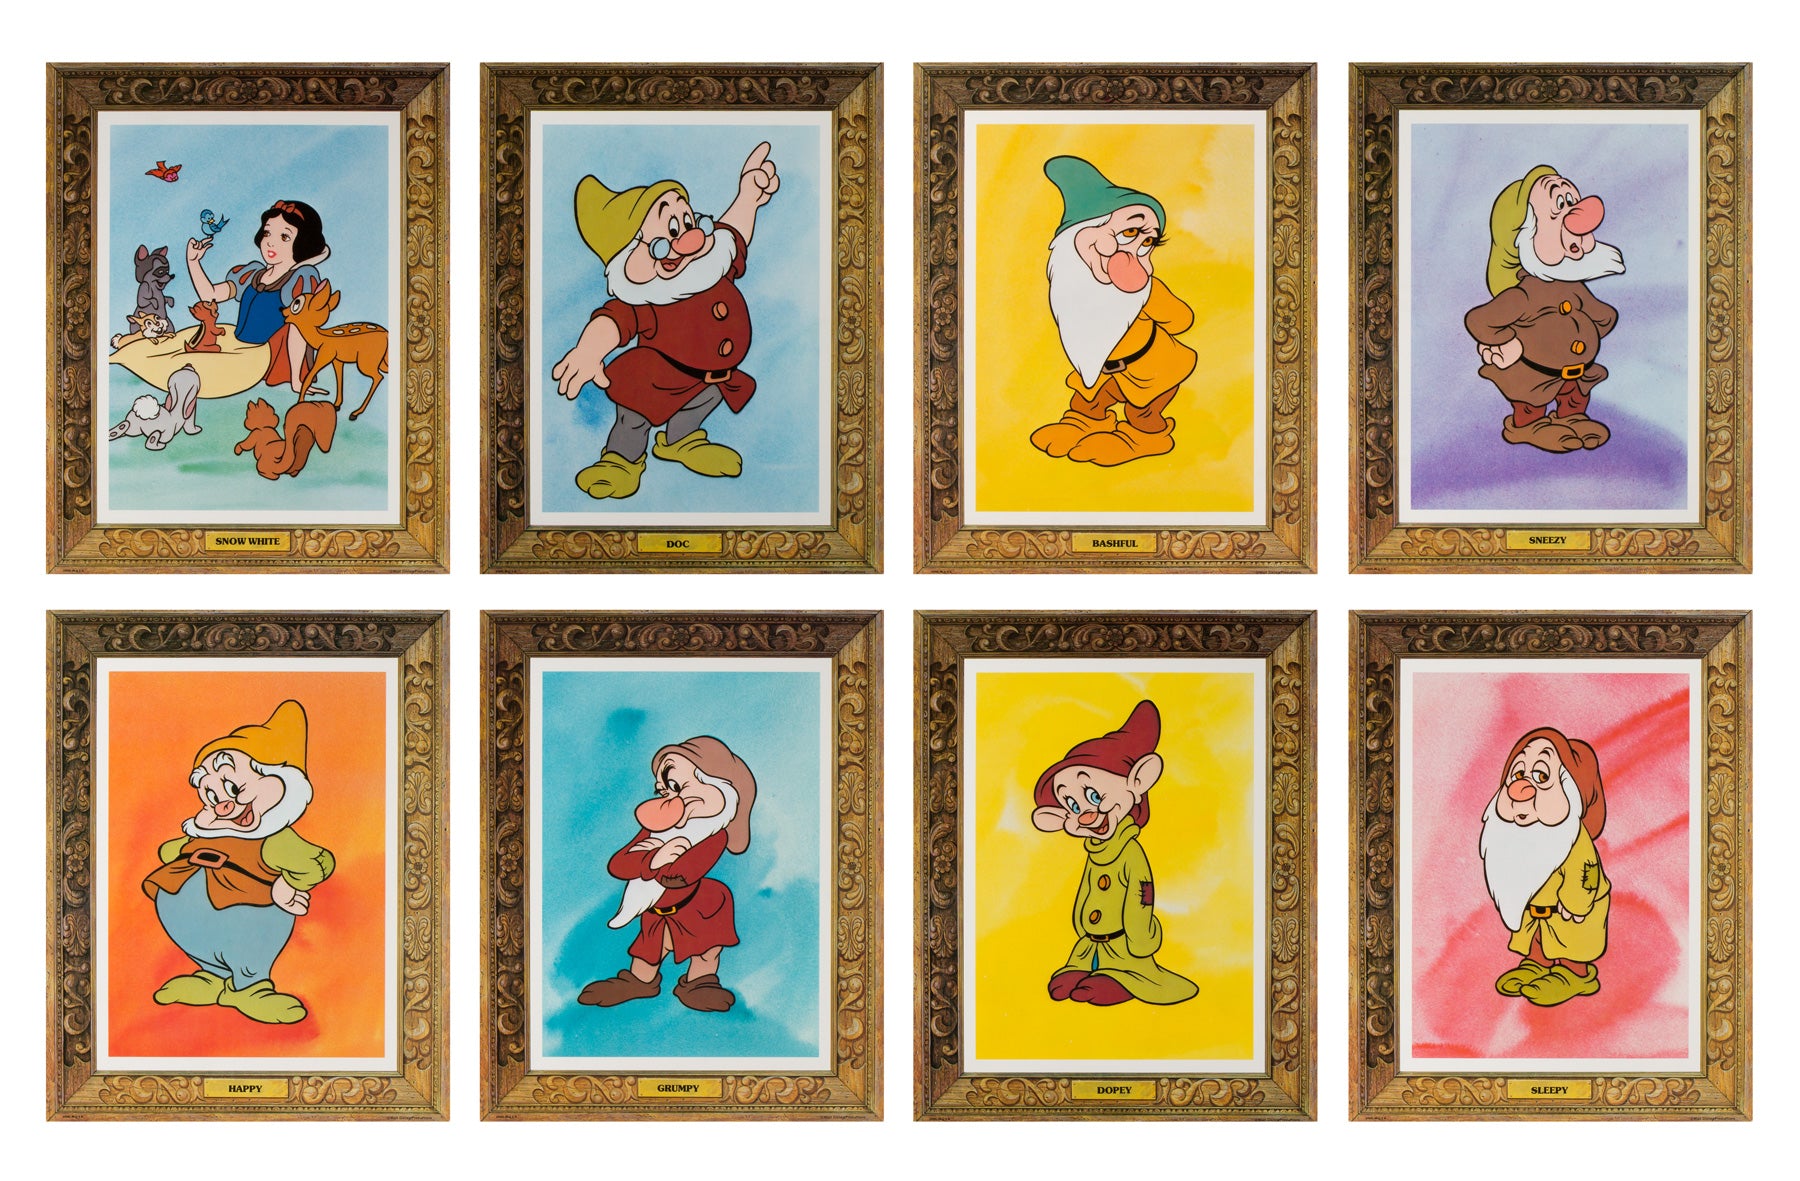 Snow White and the Seven Dwarfs R1975 US Lobby Cards Set - Orson